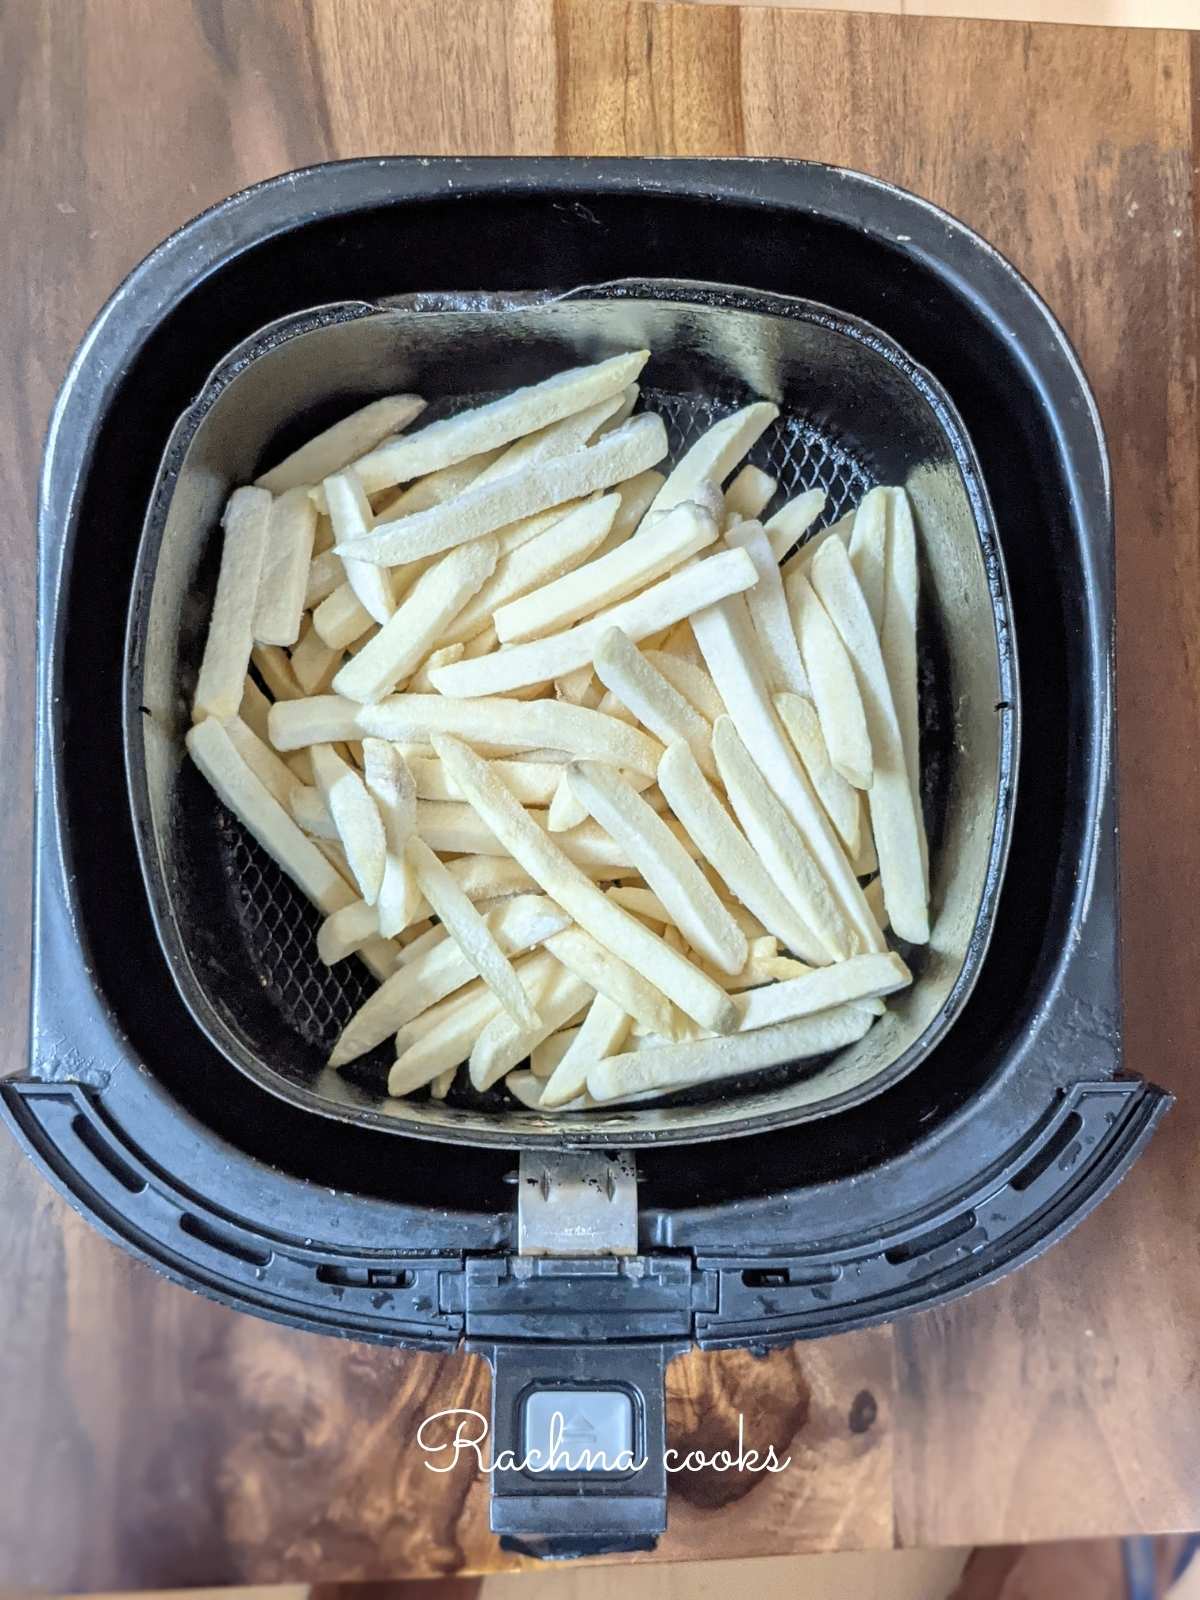 Frozen french fries laid in air fryer basket ready for air frying.